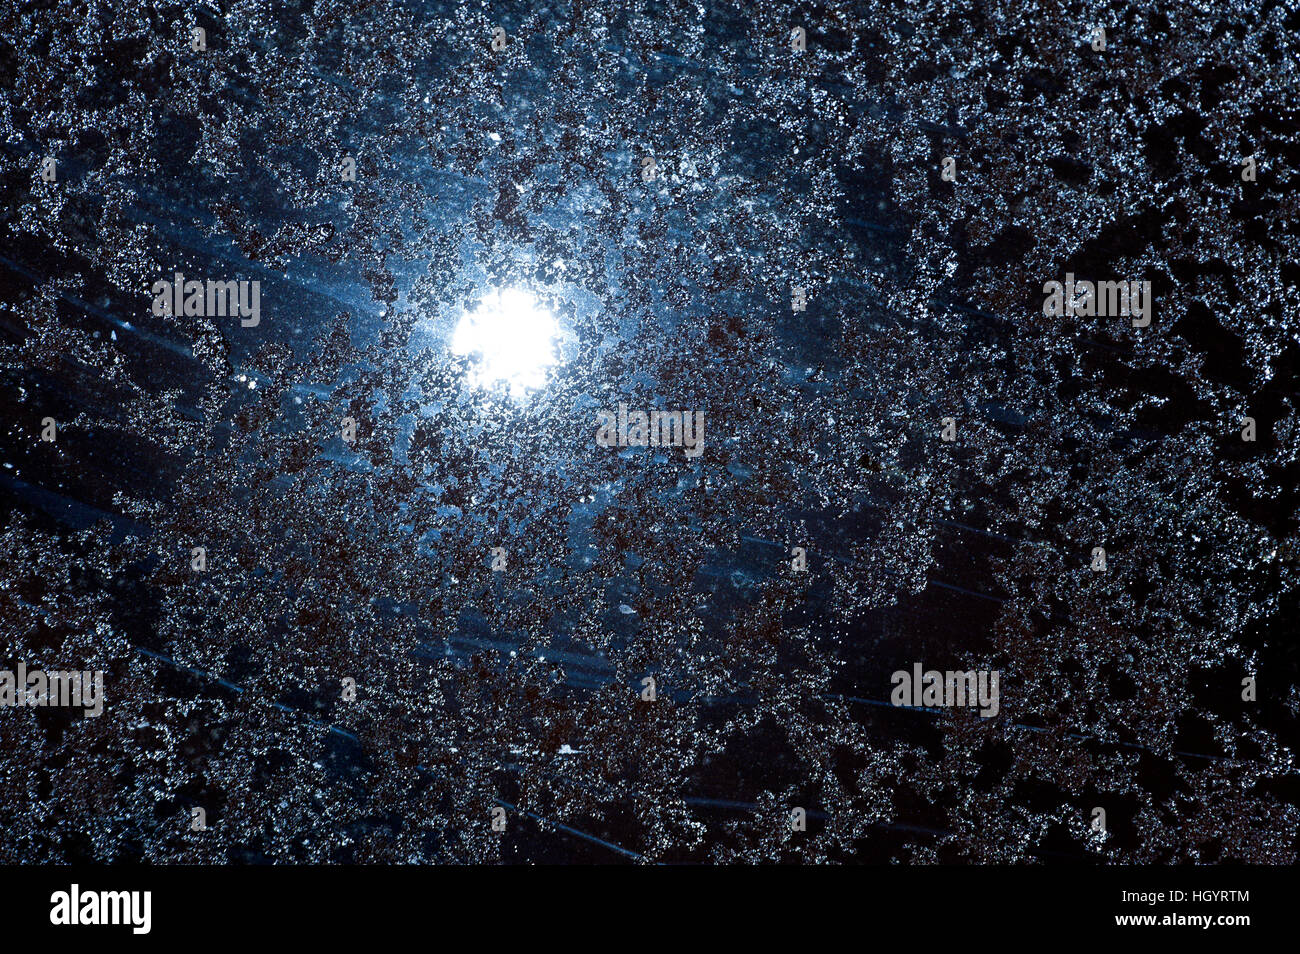 Builth Wells, UK. 14th January, 2017. A waning gibbous Wolf Moon - the January moon also known as the Old Moon -  is seen just after midnight shining eerily through icy snowflakes on a roof skylight in Builth Wells, UK. © Graham M. Lawrence/Alamy Live News Stock Photo